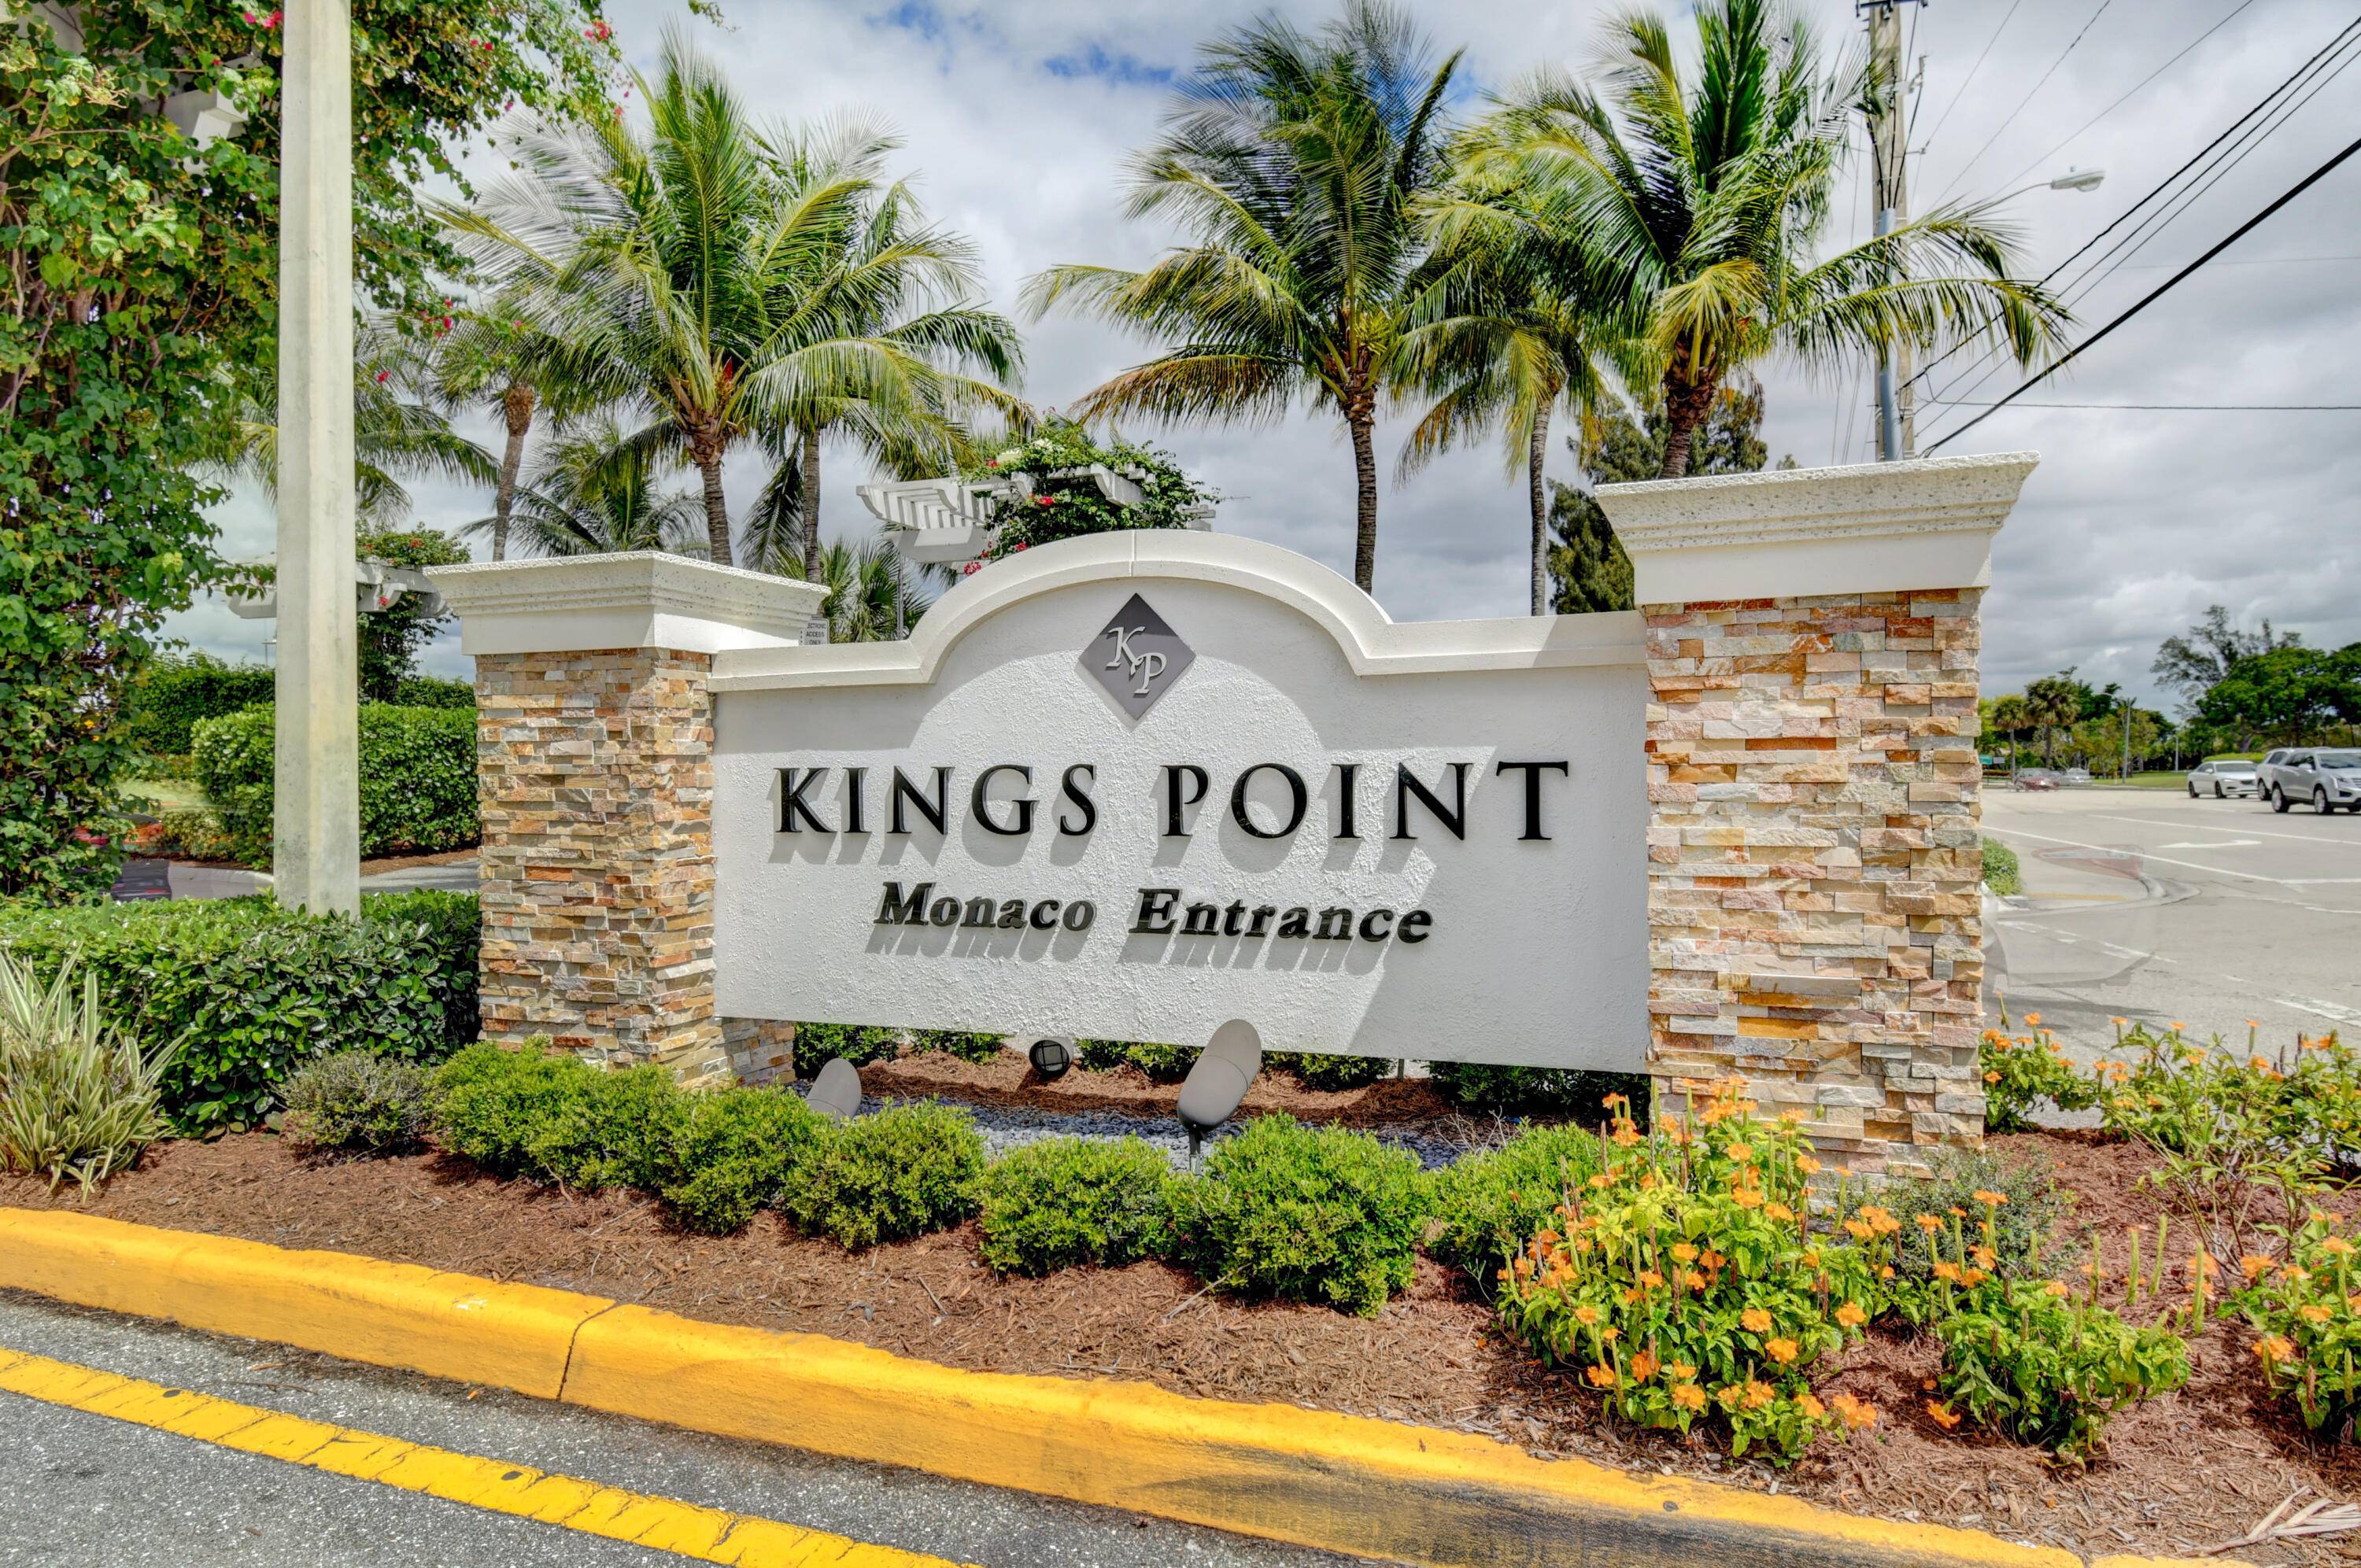 Beautiful 1 bedroom 1 1 2 bath villa in Kings Point Golf and Country Club community This home has been totally updated and lovingly cared for.